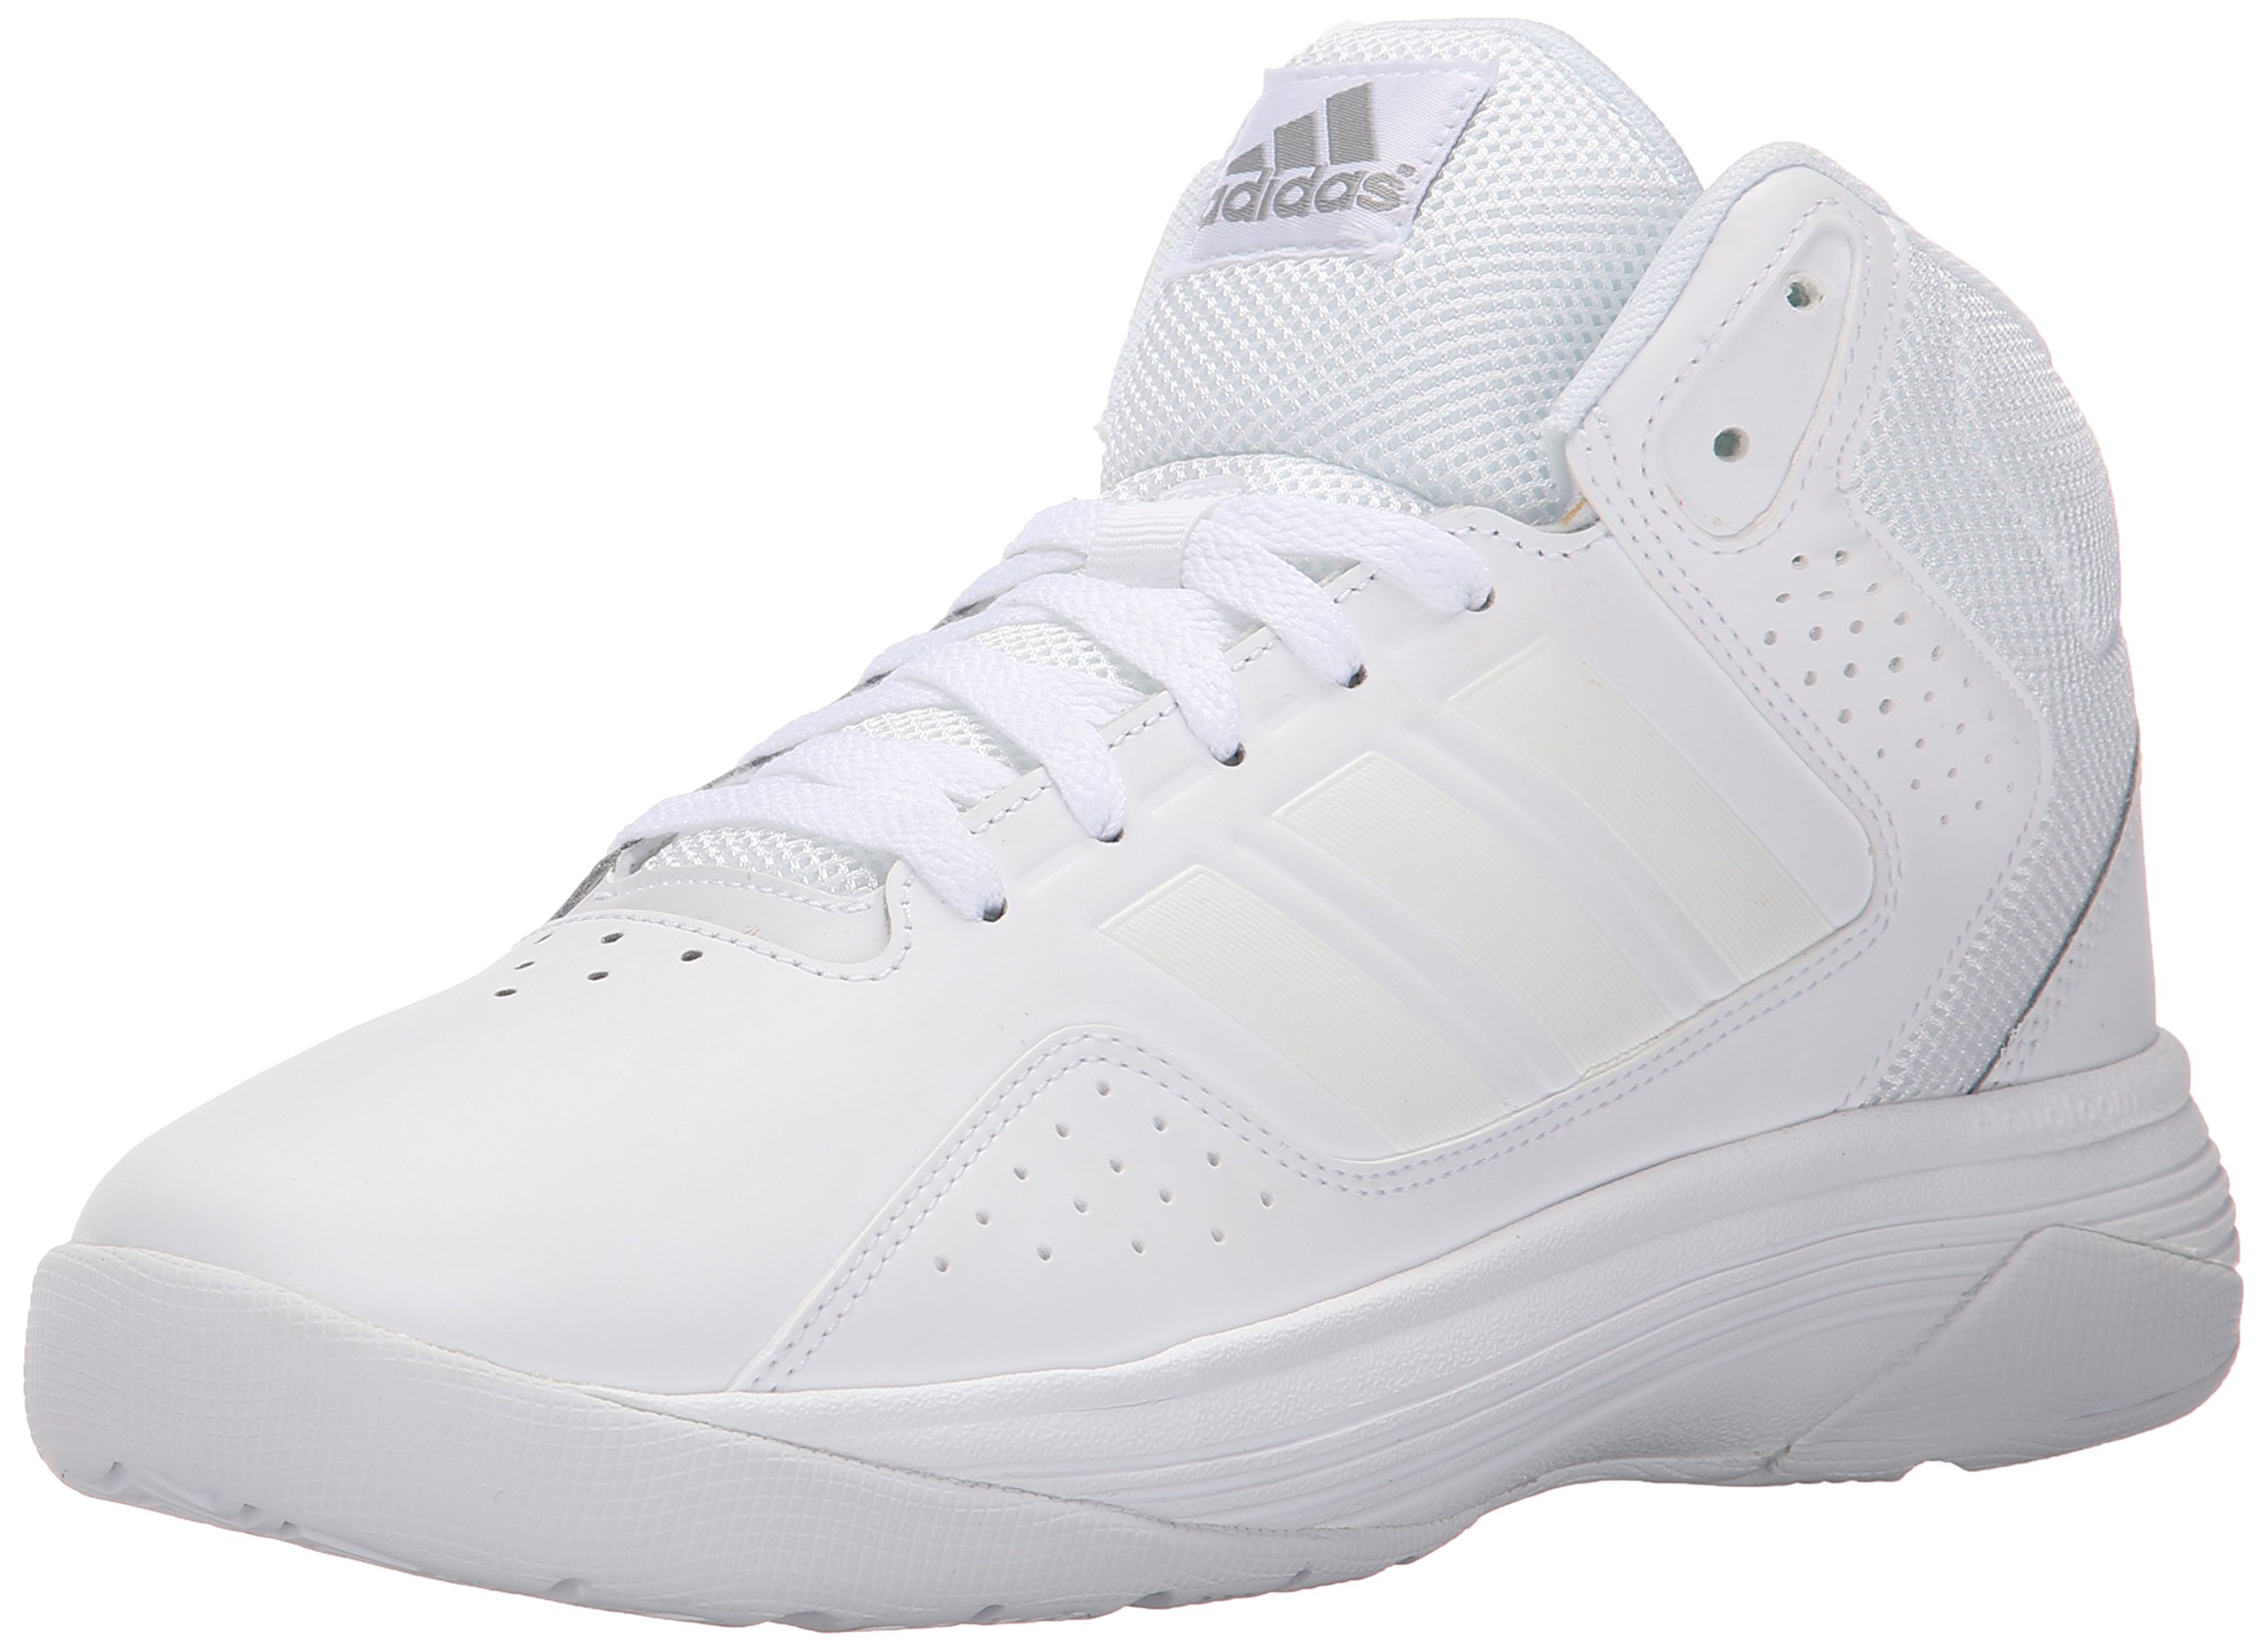 219 best basketball shoes